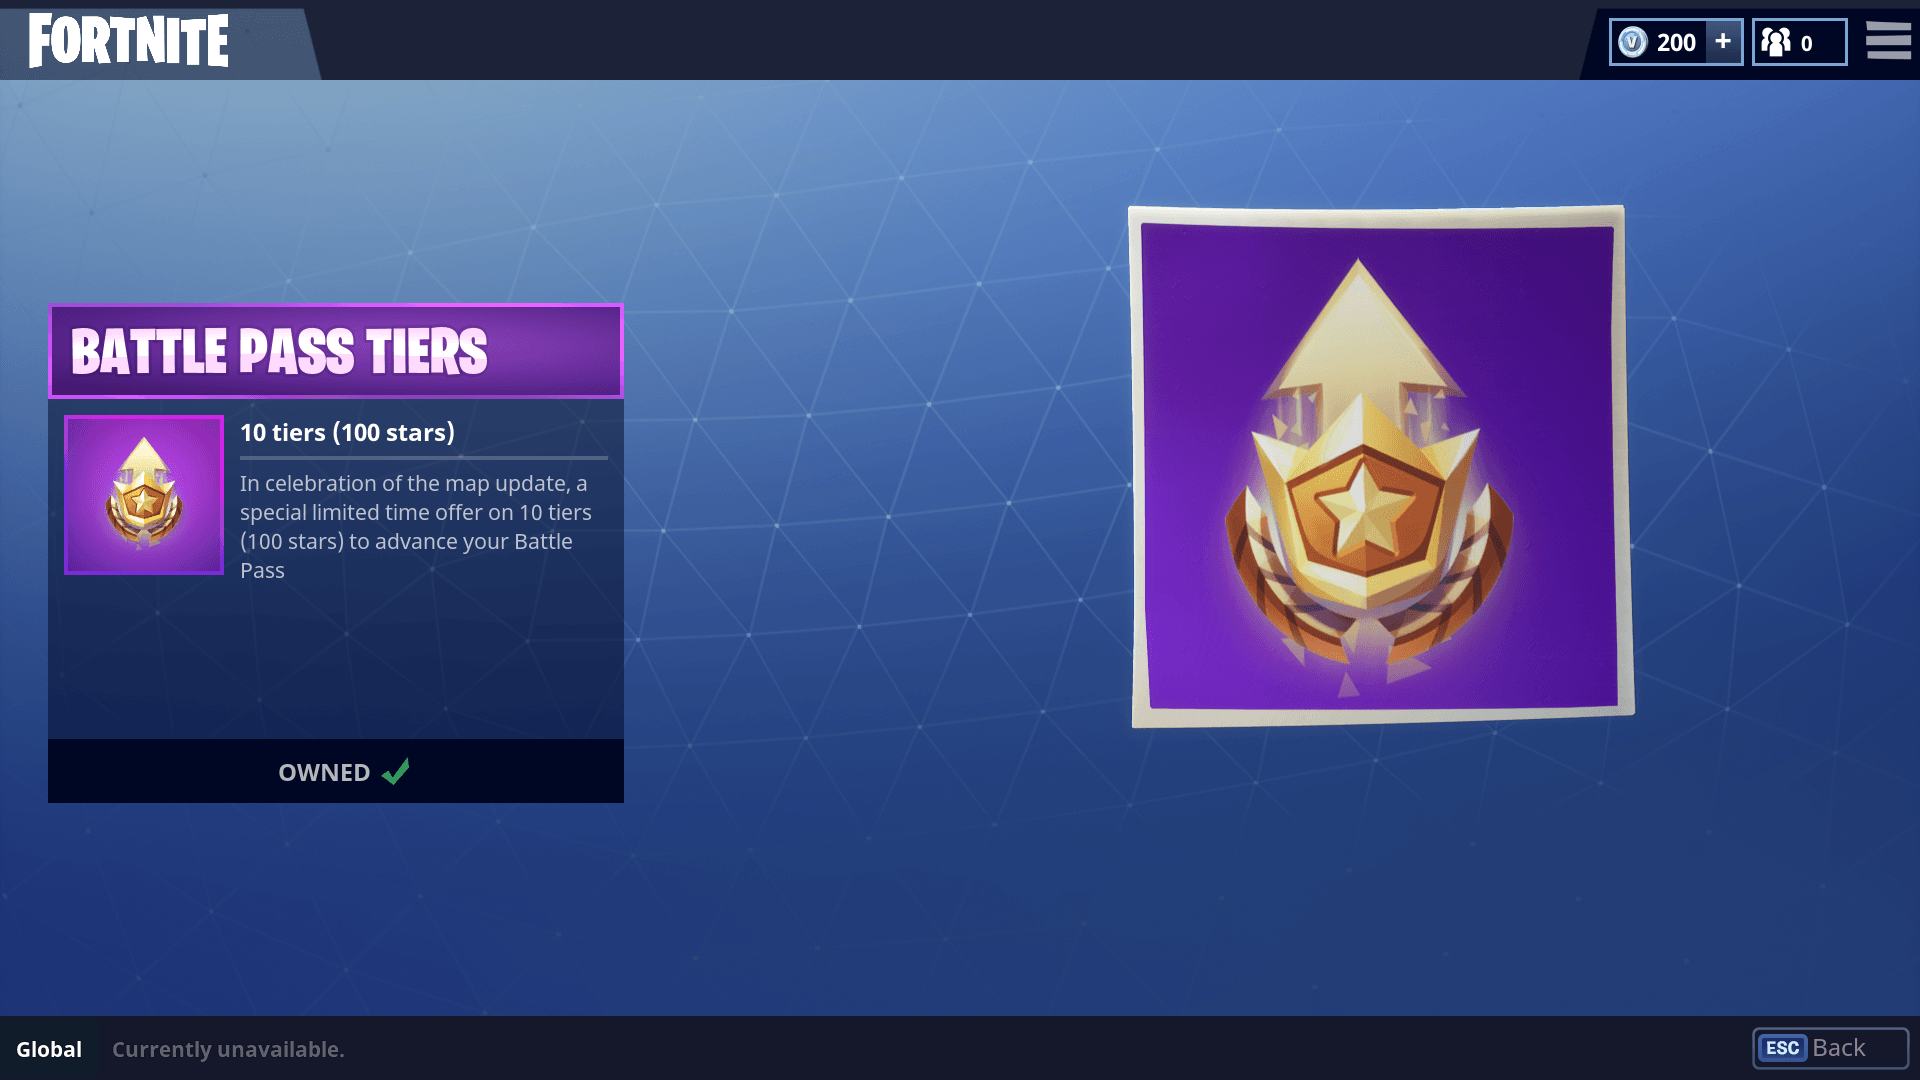 Battle Pass Fortnite Logo - I bought a Battle Pass Tier with my V-Bucks today, since it was half ...